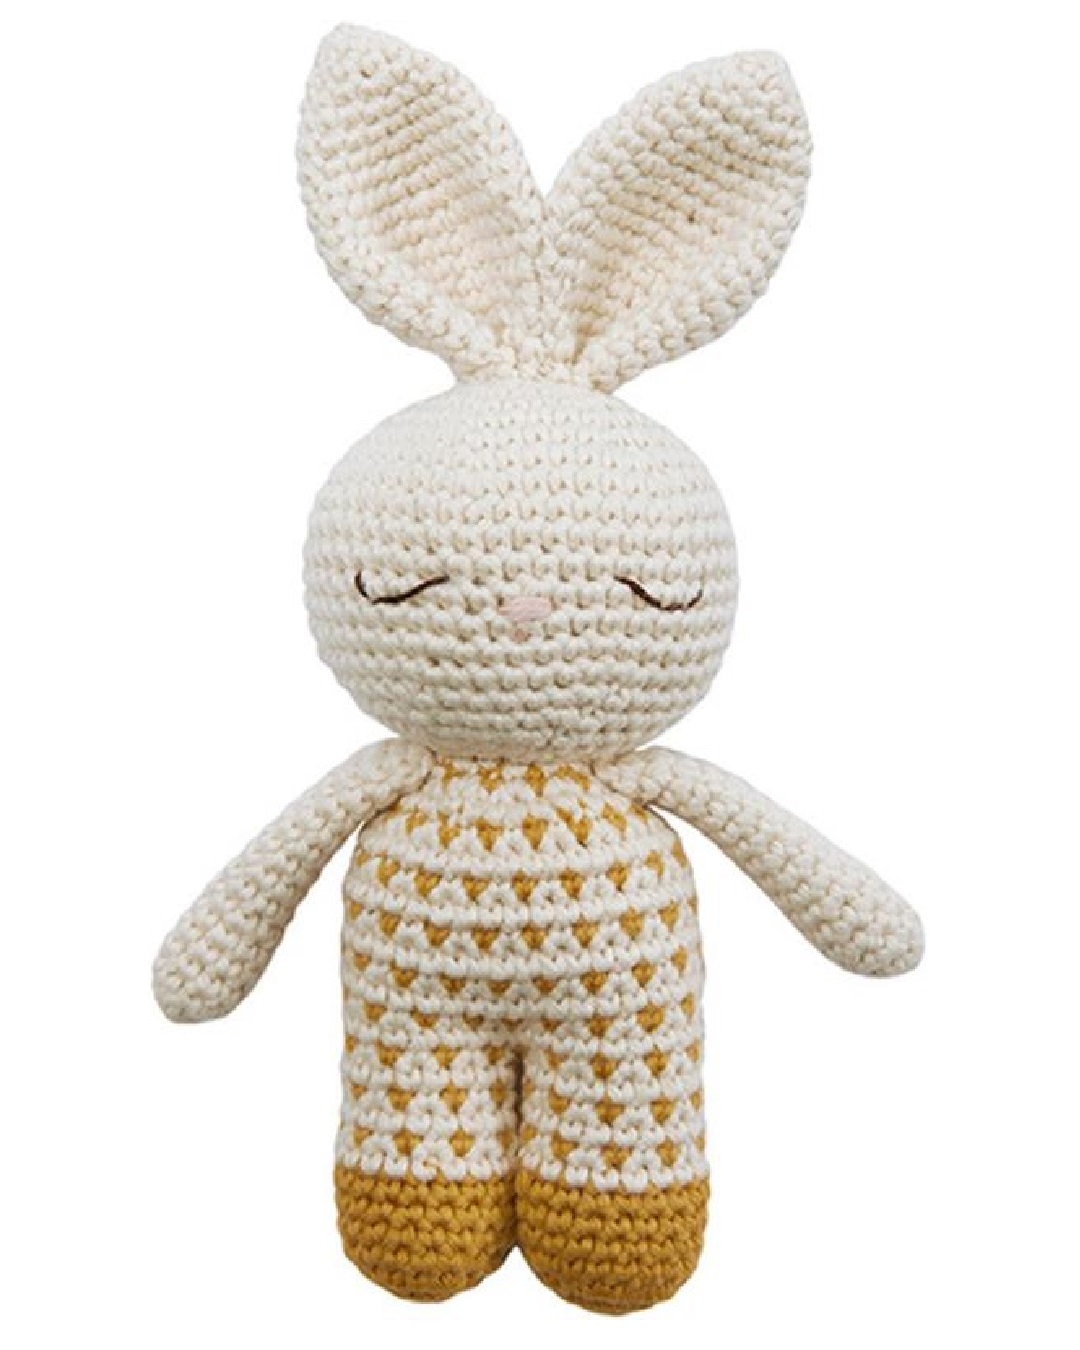 Crocheted bunny soft toy